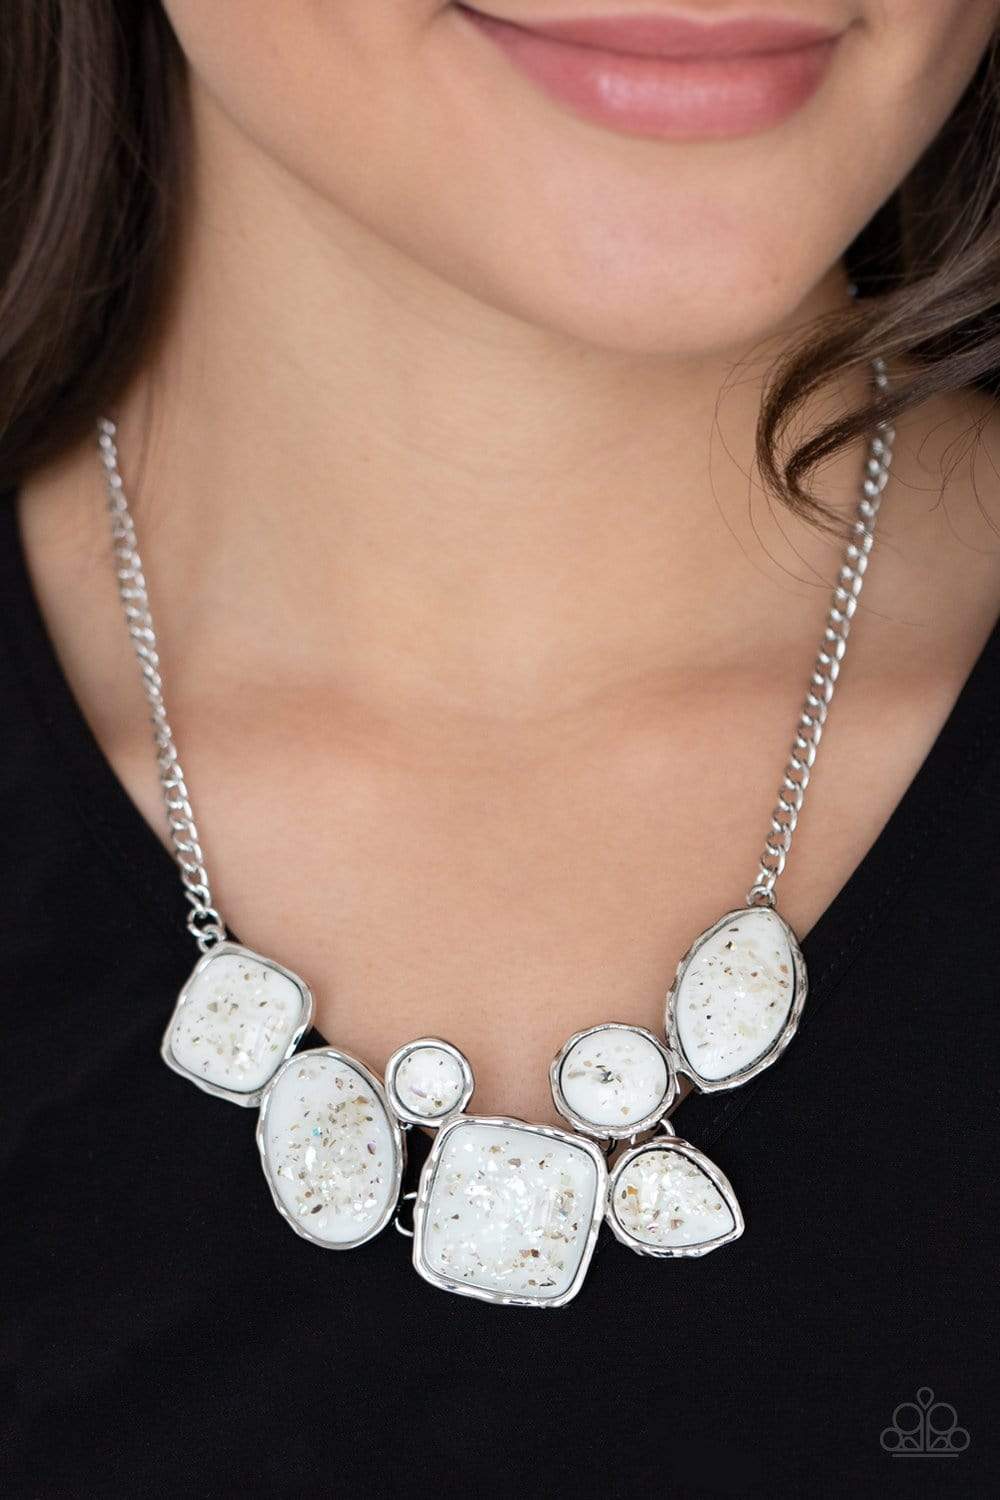 Paparazzi Accessories: So Jelly - White Iridescent Necklace - Jewels N Thingz Boutique